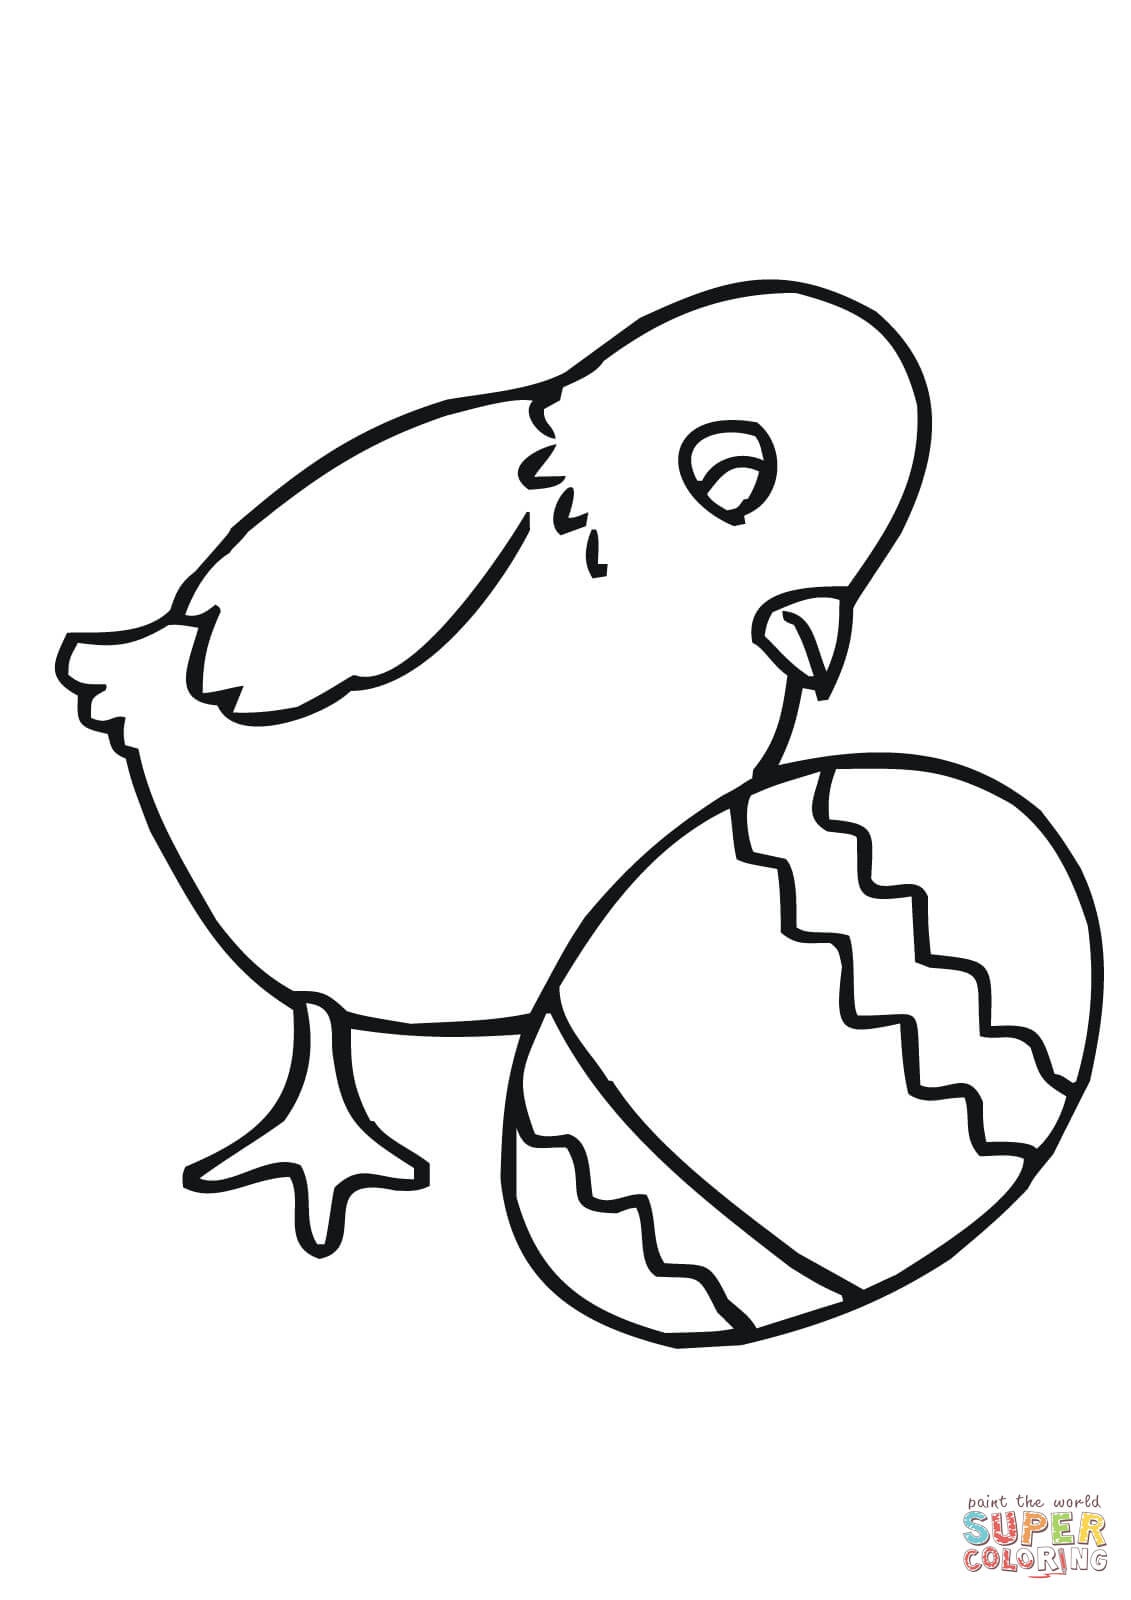 Easter Chick With Egg Coloring Page | Free Printable Coloring Pages - Free Printable Easter Baby Chick Coloring Pages